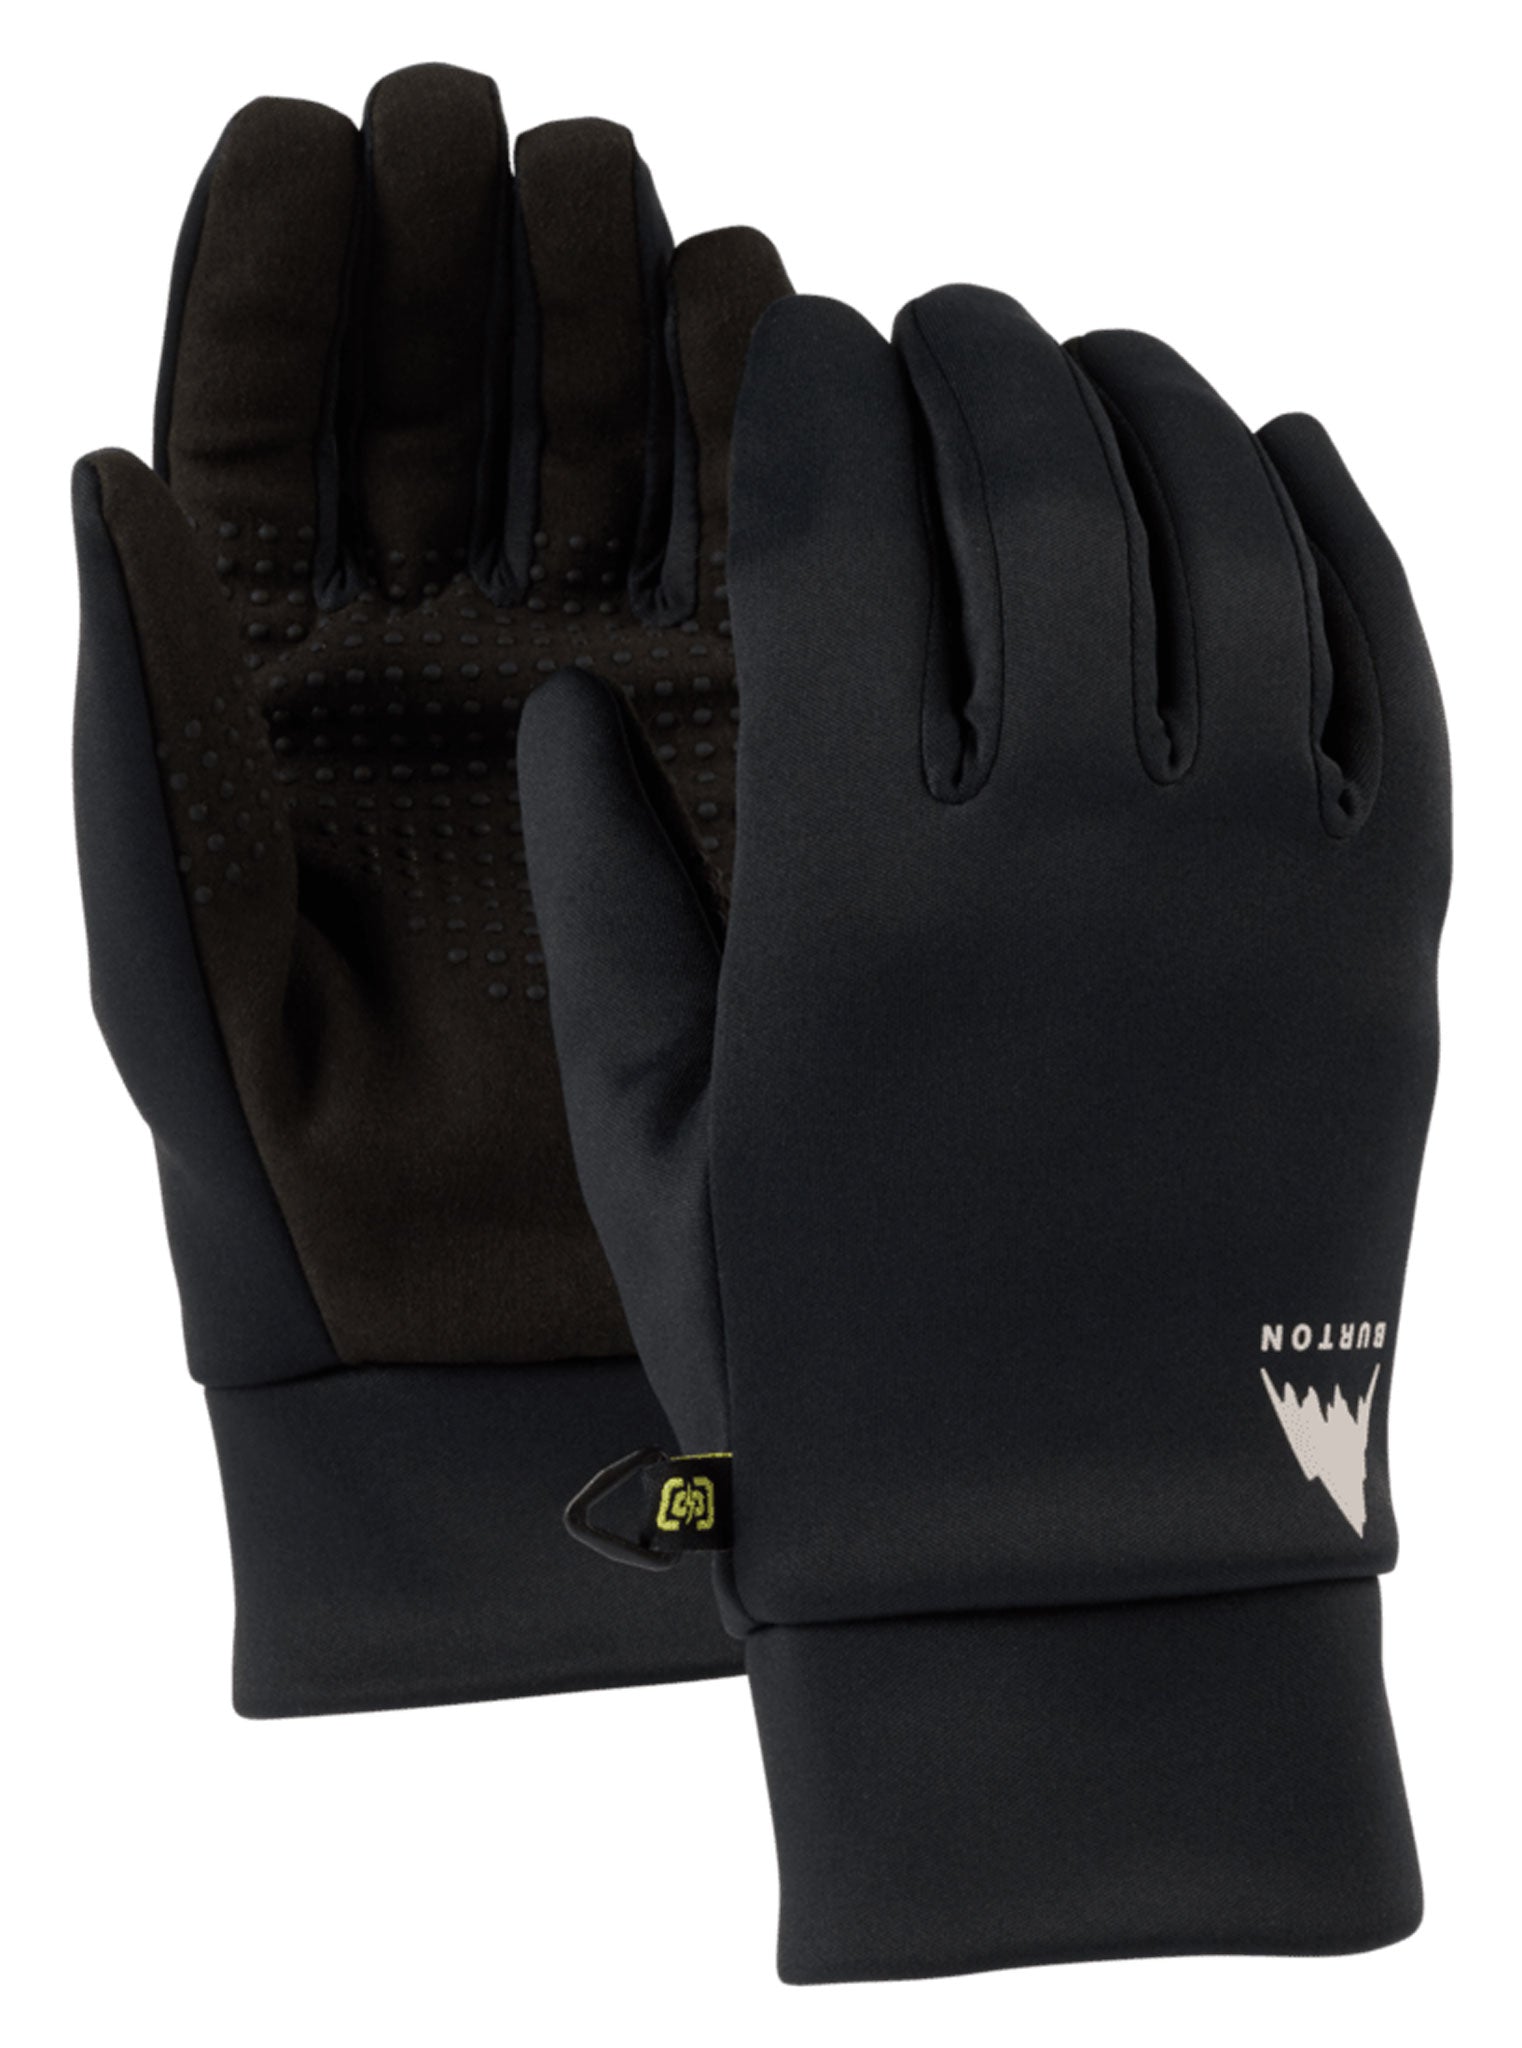 Women's Touch-N-Go Glove Liners